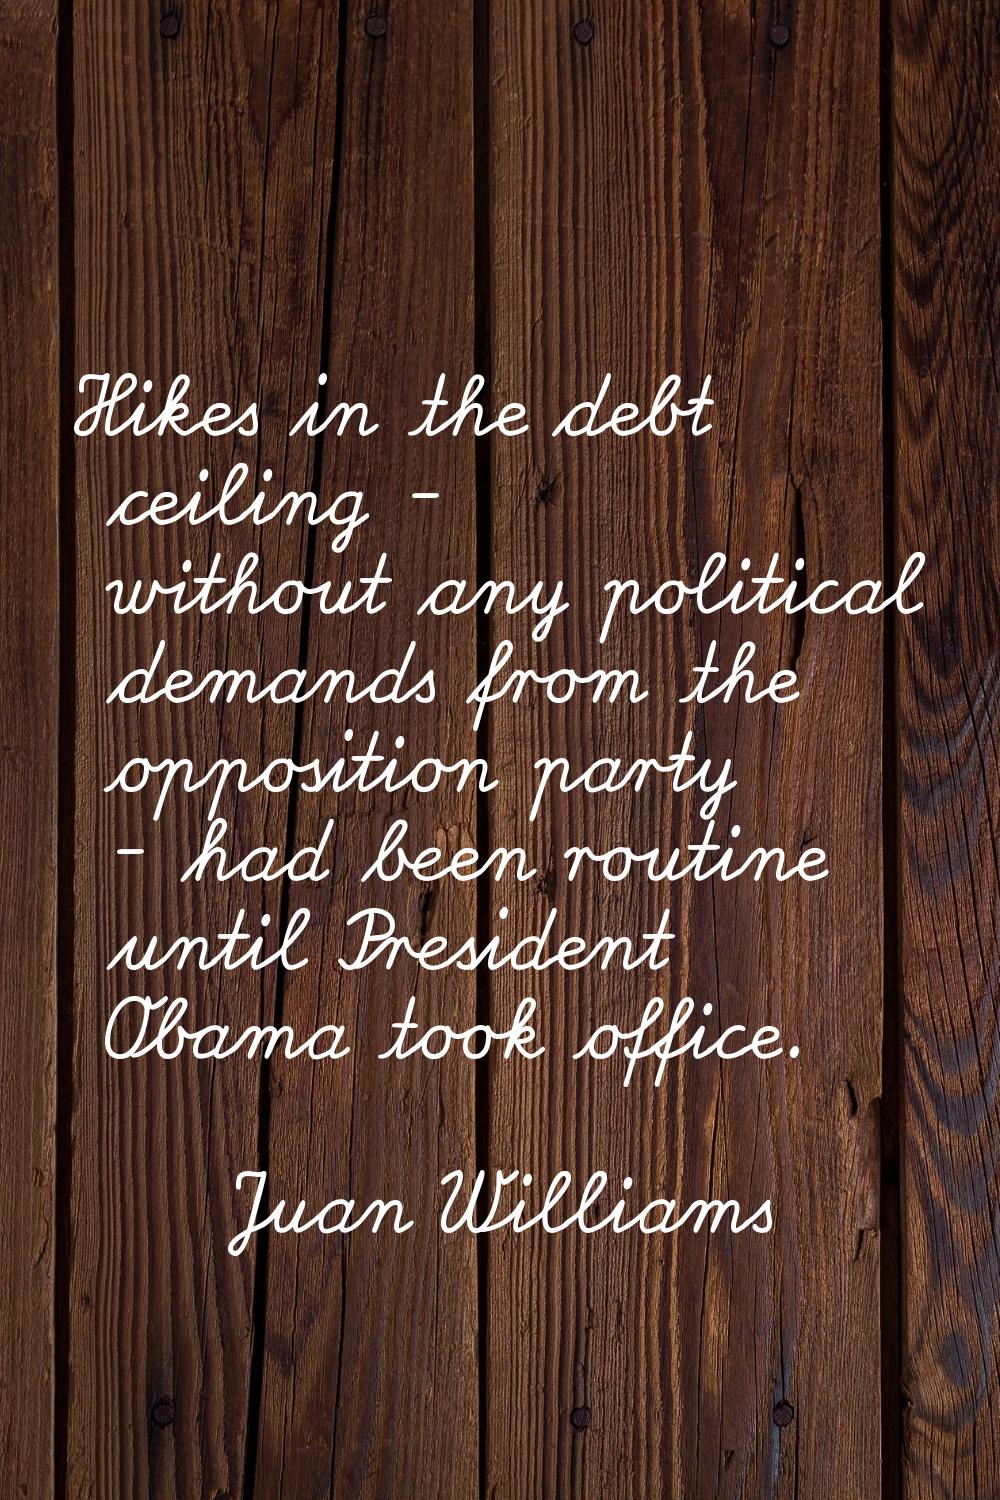 Hikes in the debt ceiling - without any political demands from the opposition party - had been rout